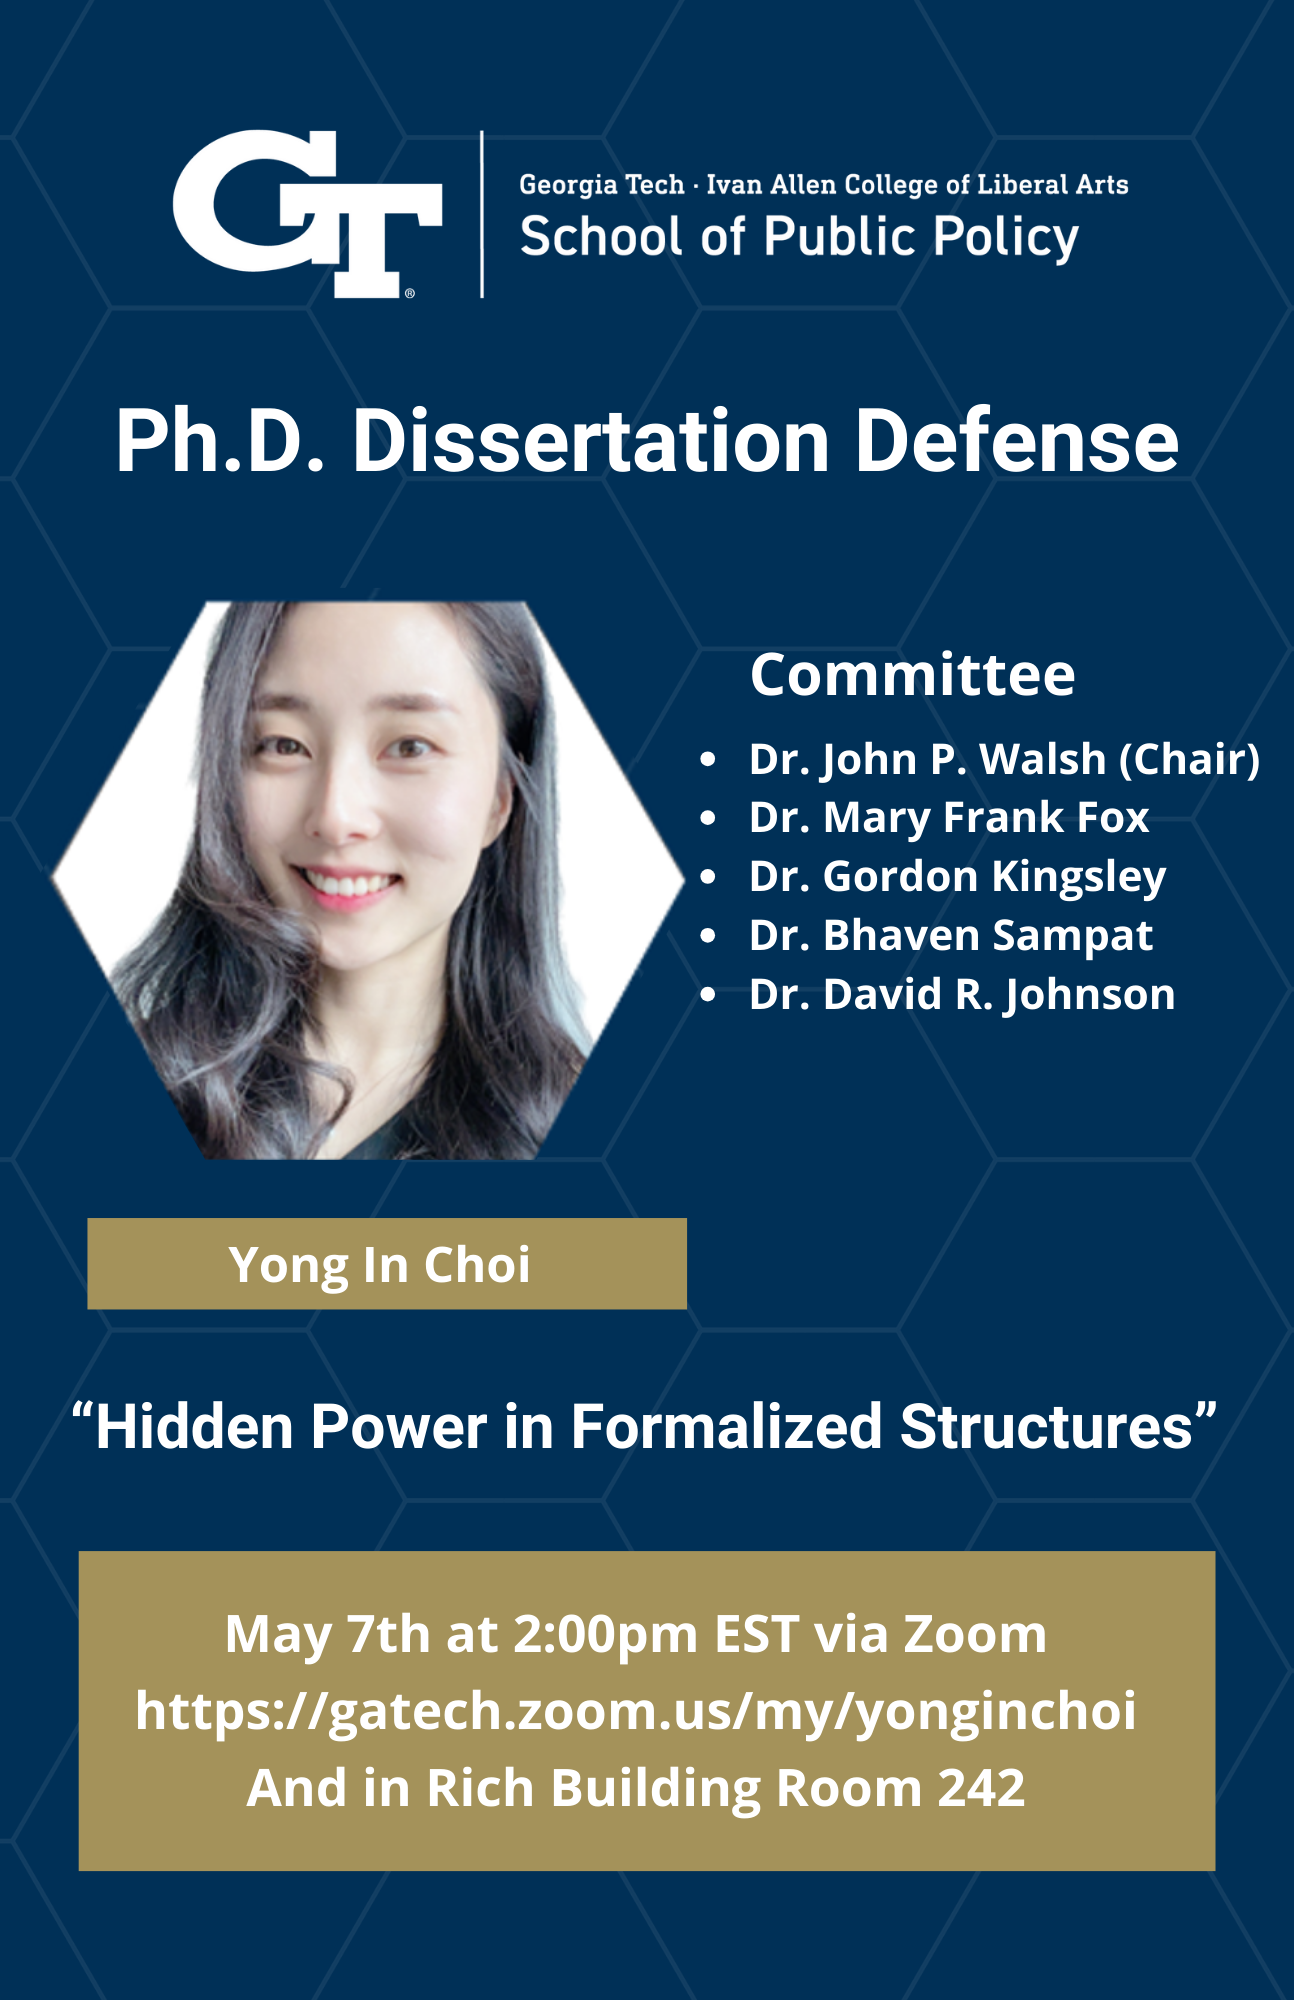 Yong In Choi will be giving her Ph.D. Dissertation Defense on Hidden Power in Formalized Structures on May 7th at 2:00pm Est via Zoom https://gatech.zoom.us/my/yonginchoi and in Rich Building Room 242. The committee consists of Dr. John P Walsh (chair), Dr. Mary Frank Fox, Dr. Gordon Kingsley, Dr. Bhaven Sampat, and Dr. David R. Johnson. 